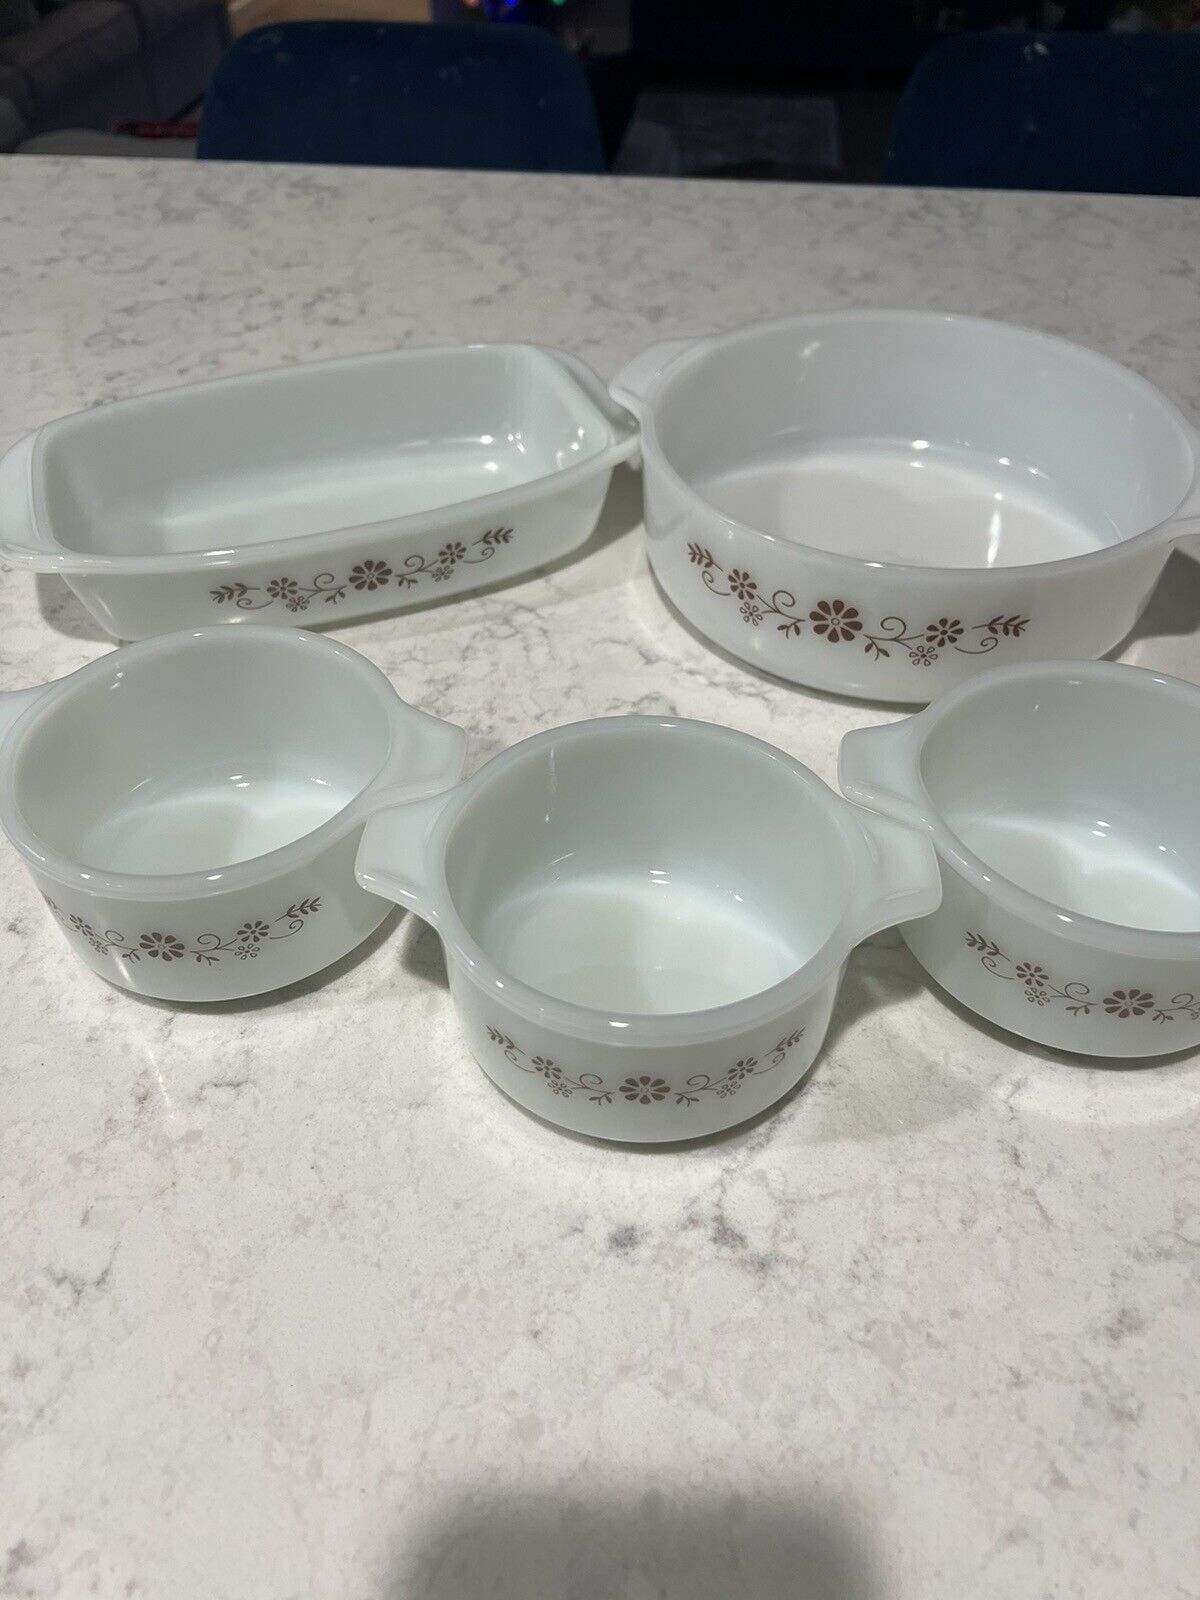 Vintage 1950s Pyrex Brown Daisy Milk Glass Set Of 5 Dishes